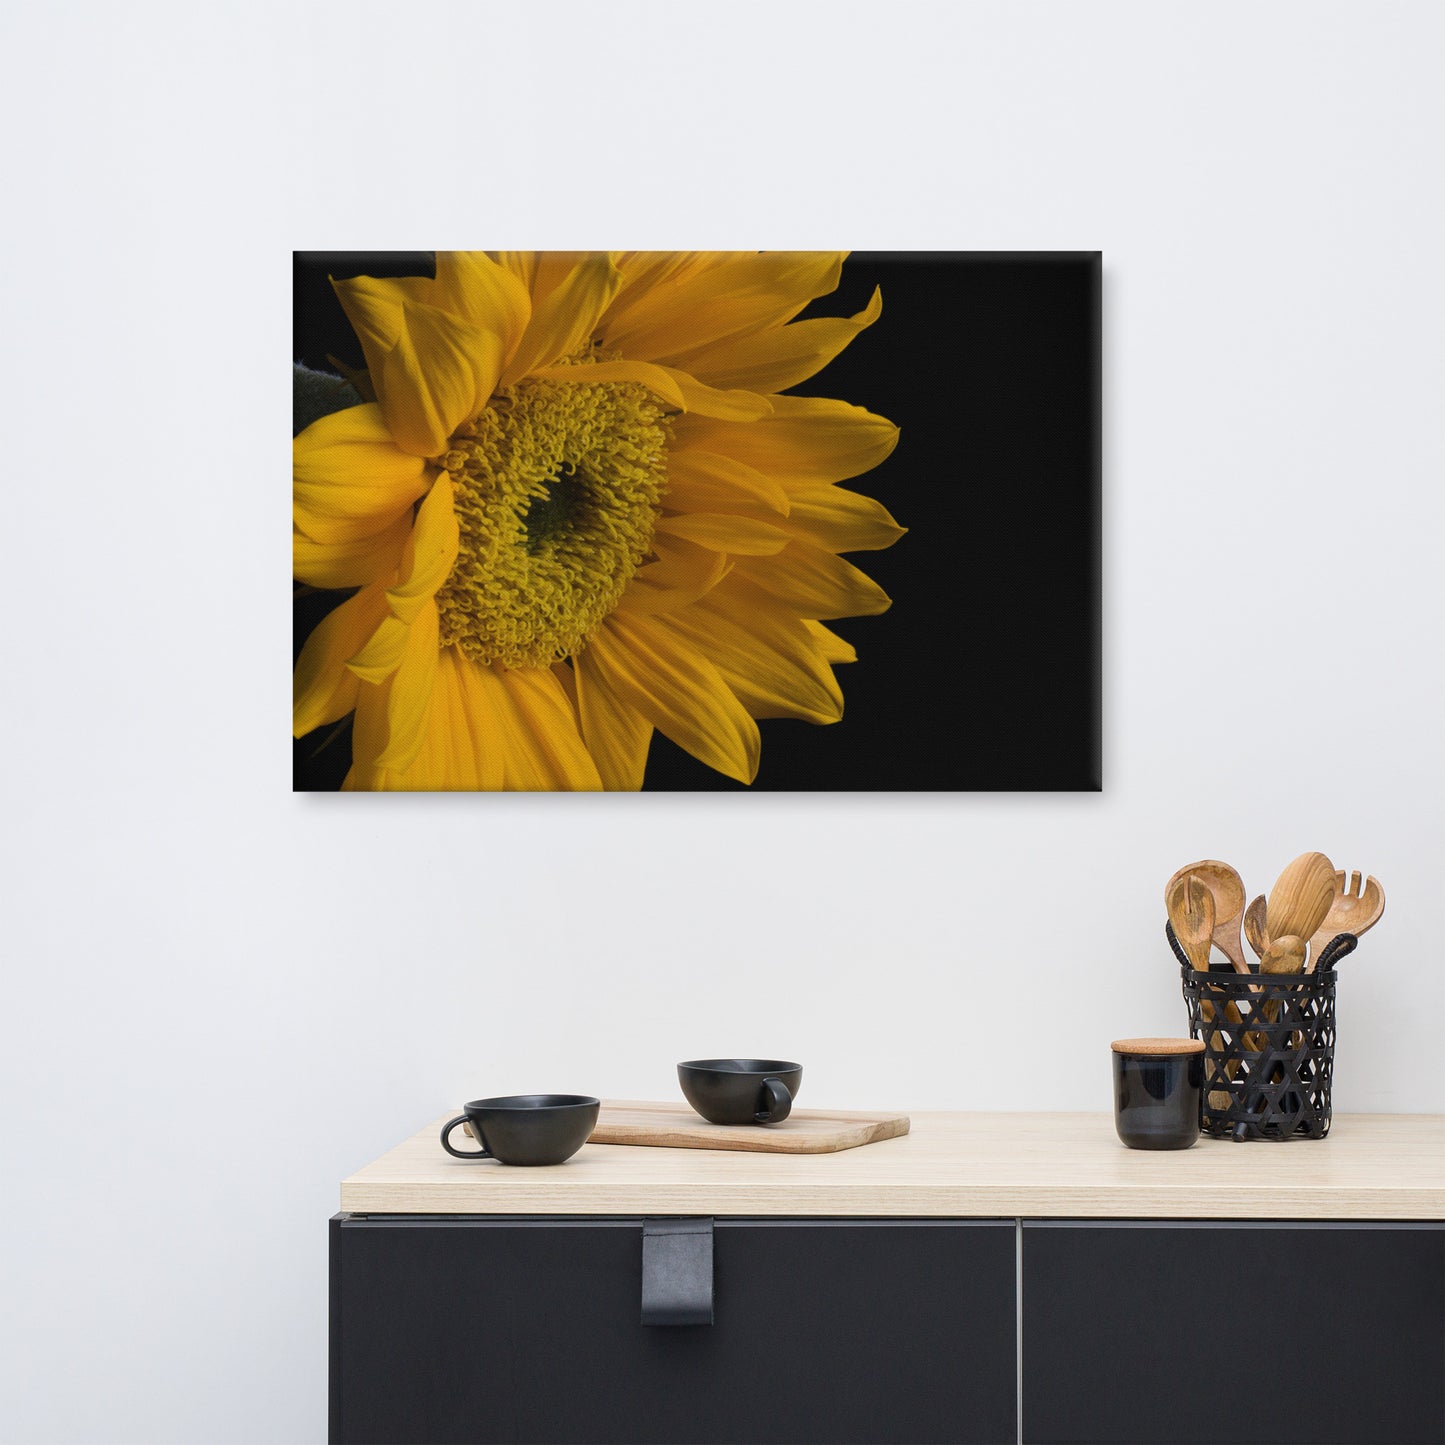 Sunflower from Left Floral Nature Canvas Wall Art Prints